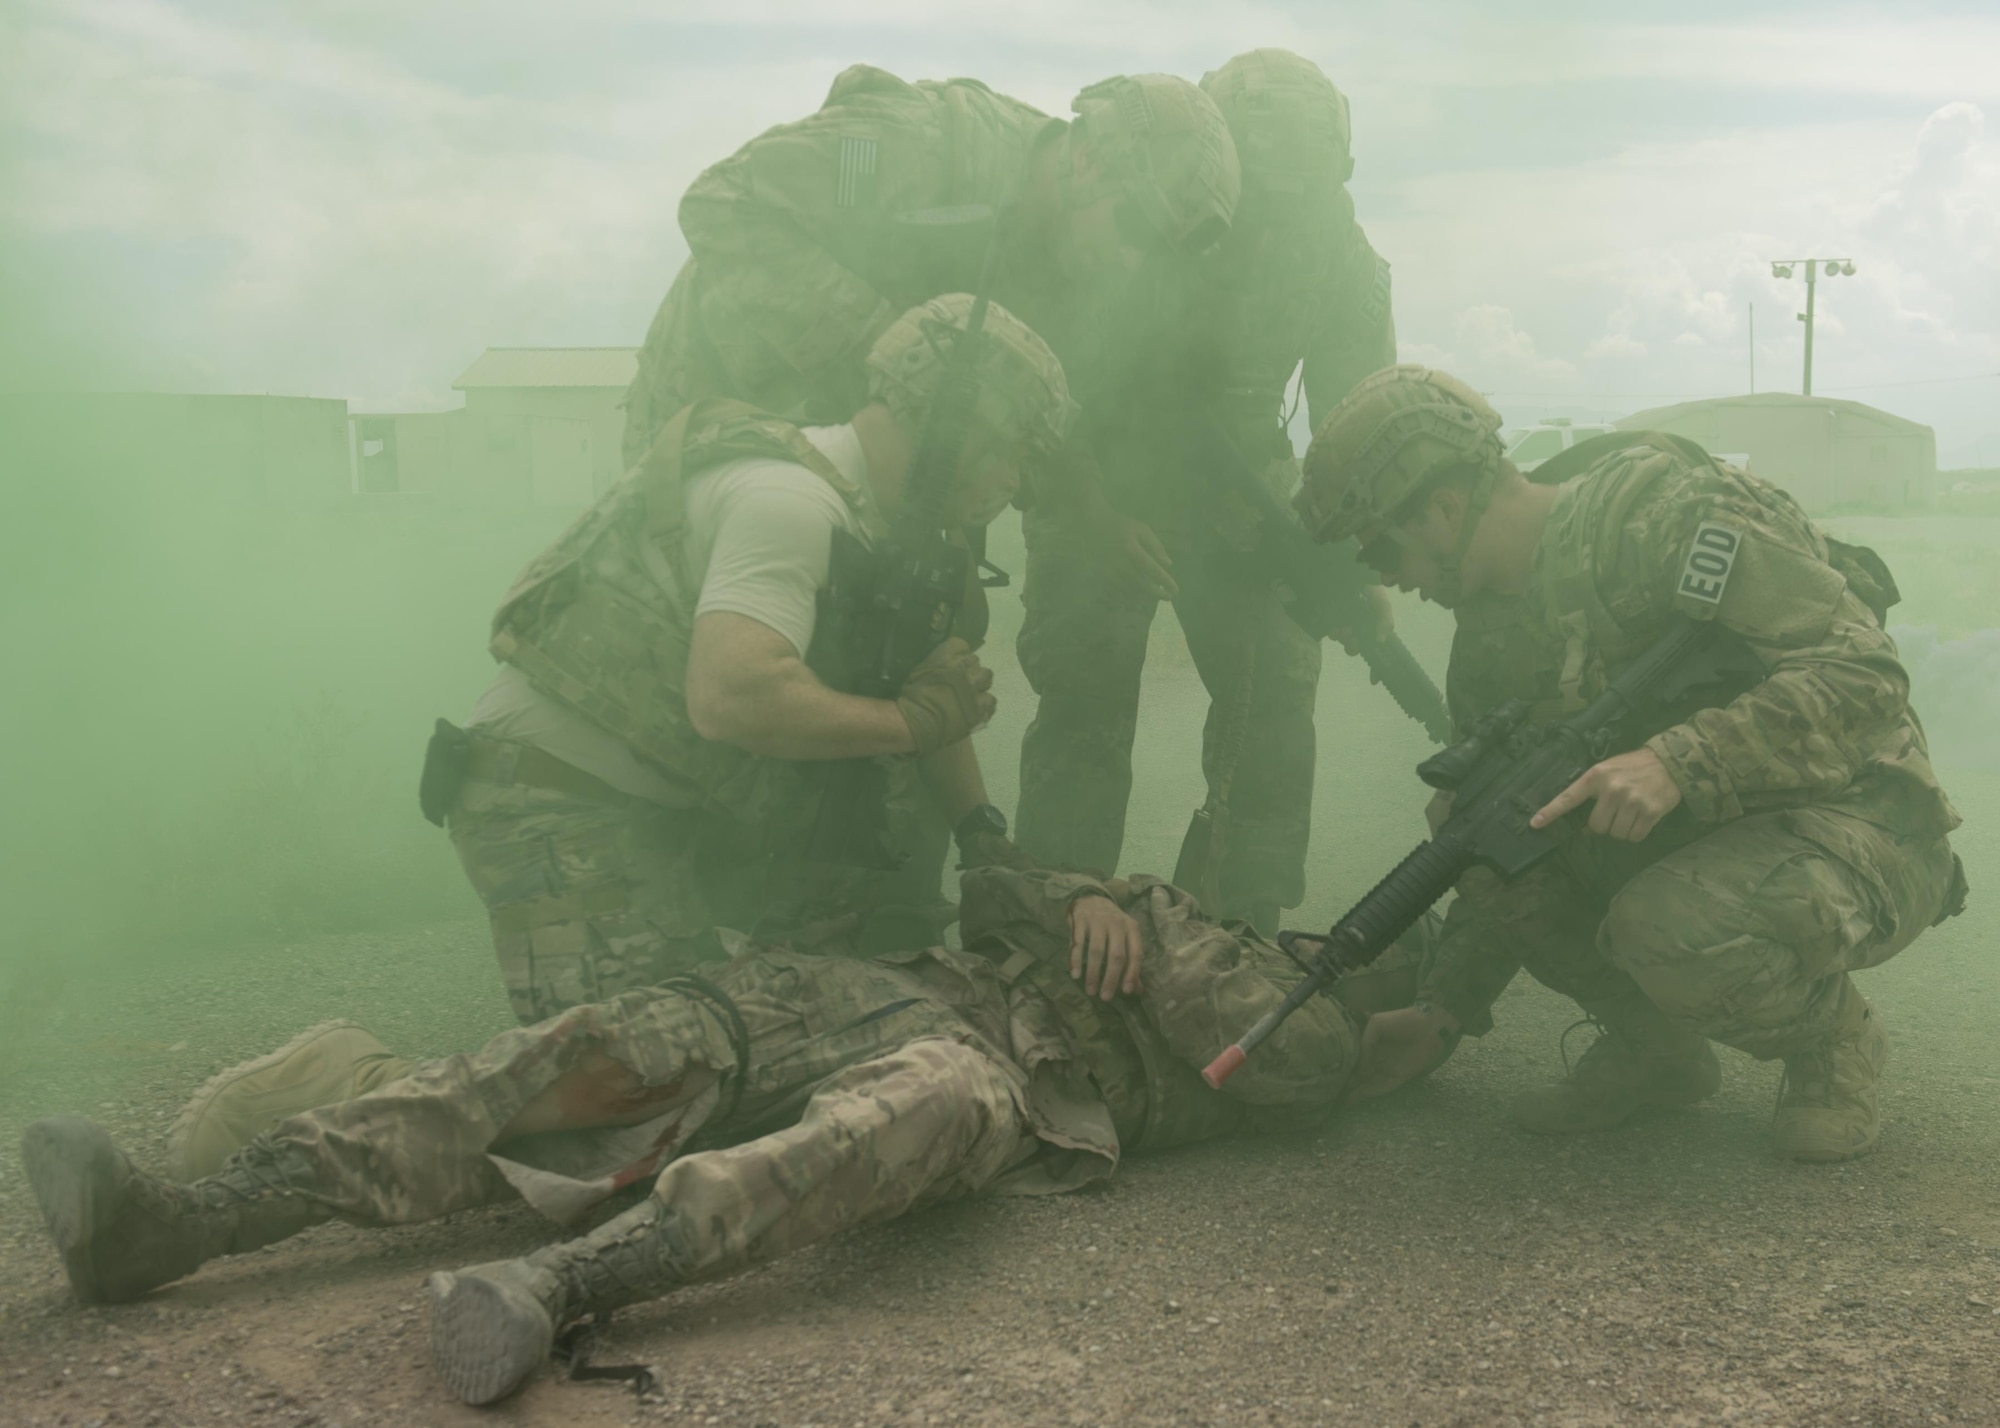 Explosive Ordnance Disposal Airmen assess a simulated casualty during a Tactical Combat Casualty Care exercise at Holloman Air Force Base, N.M., on April 31, 2017. The training focuses on individual trauma, tools, techniques, and treatment procedures. The exercise also included the use of moulage, non-lethal training munitions, trained role-players, and a multitude of other artificial stressors. (U.S. Air Force Photo by Senior Airman Chase Cannon)